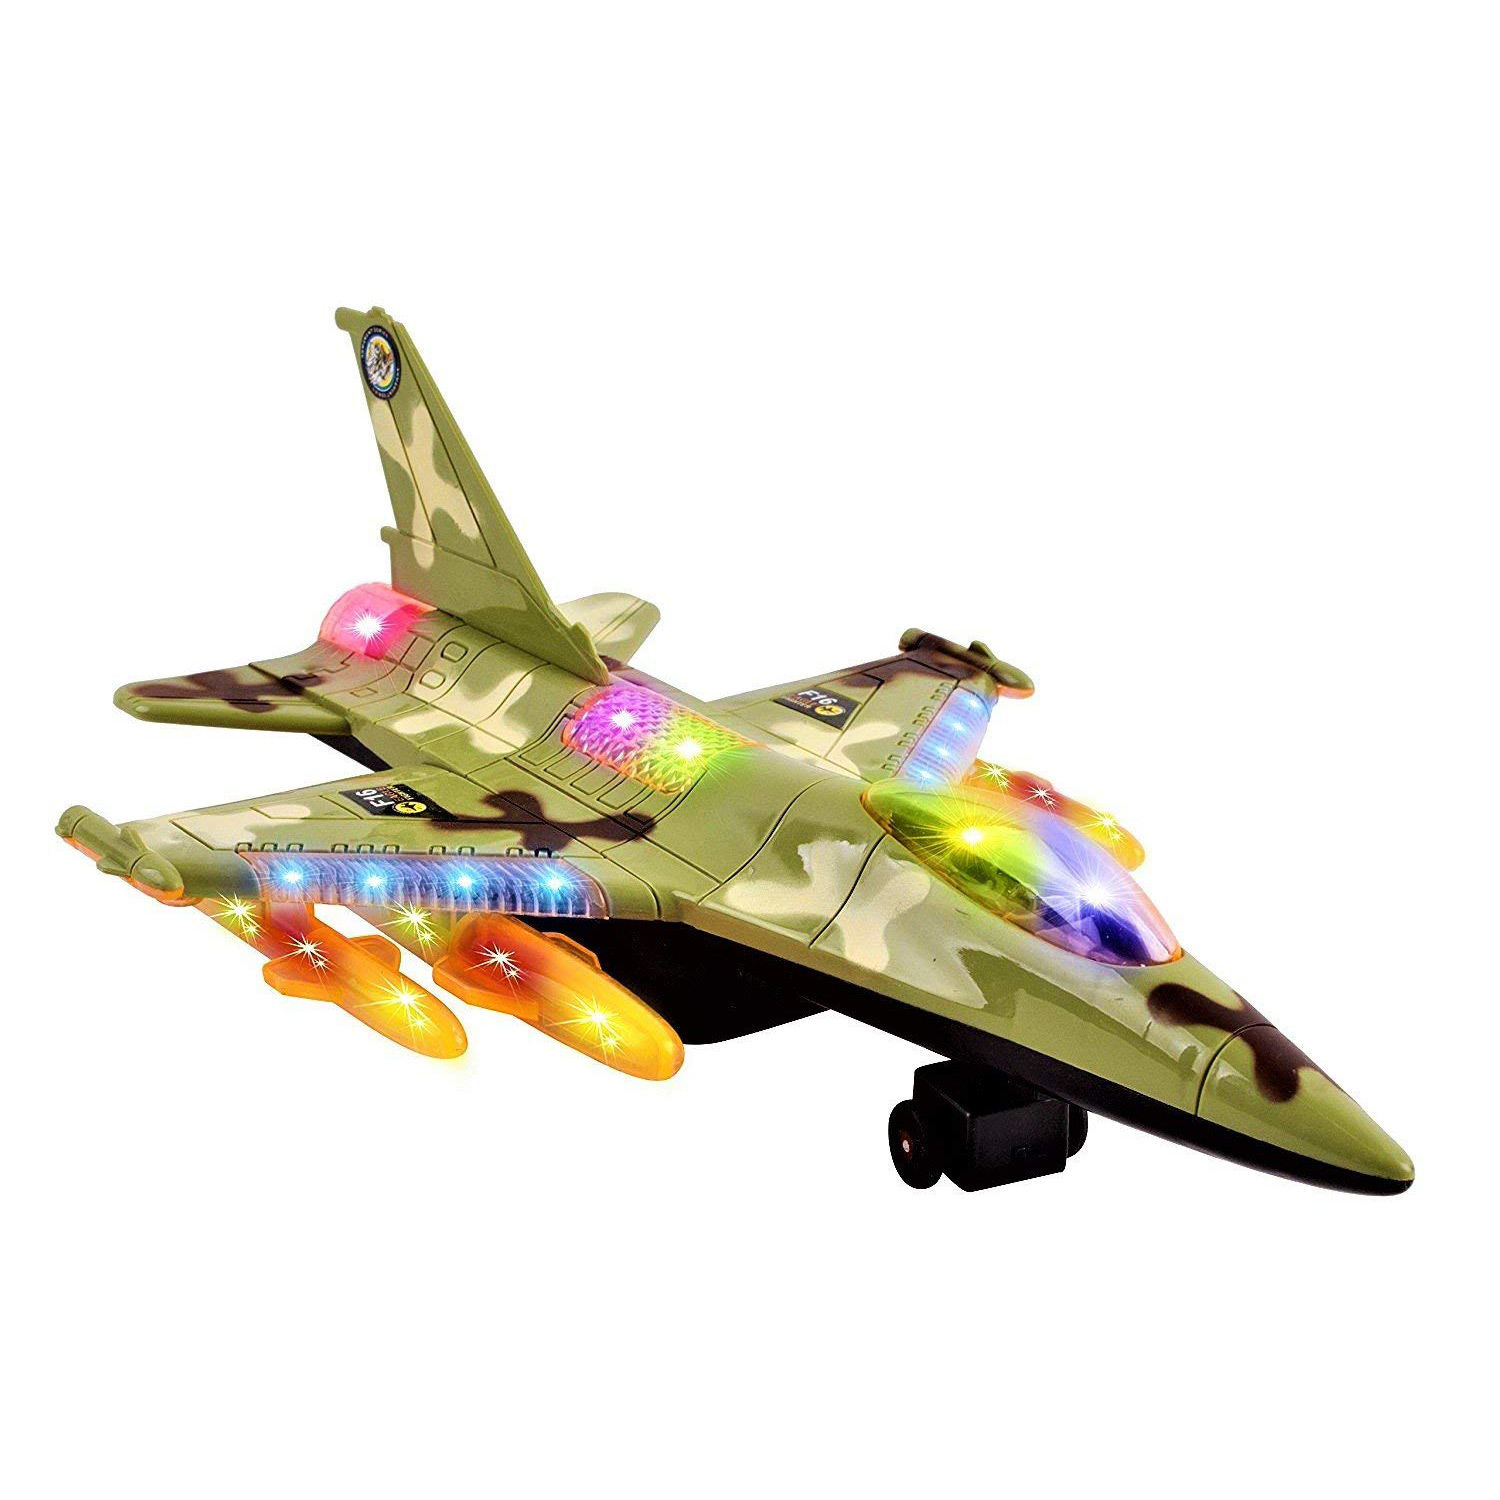 BUMP AND GO LIGHT UP FLASHING MILITARY JET PLANE battery operated toy AIRPLANE 